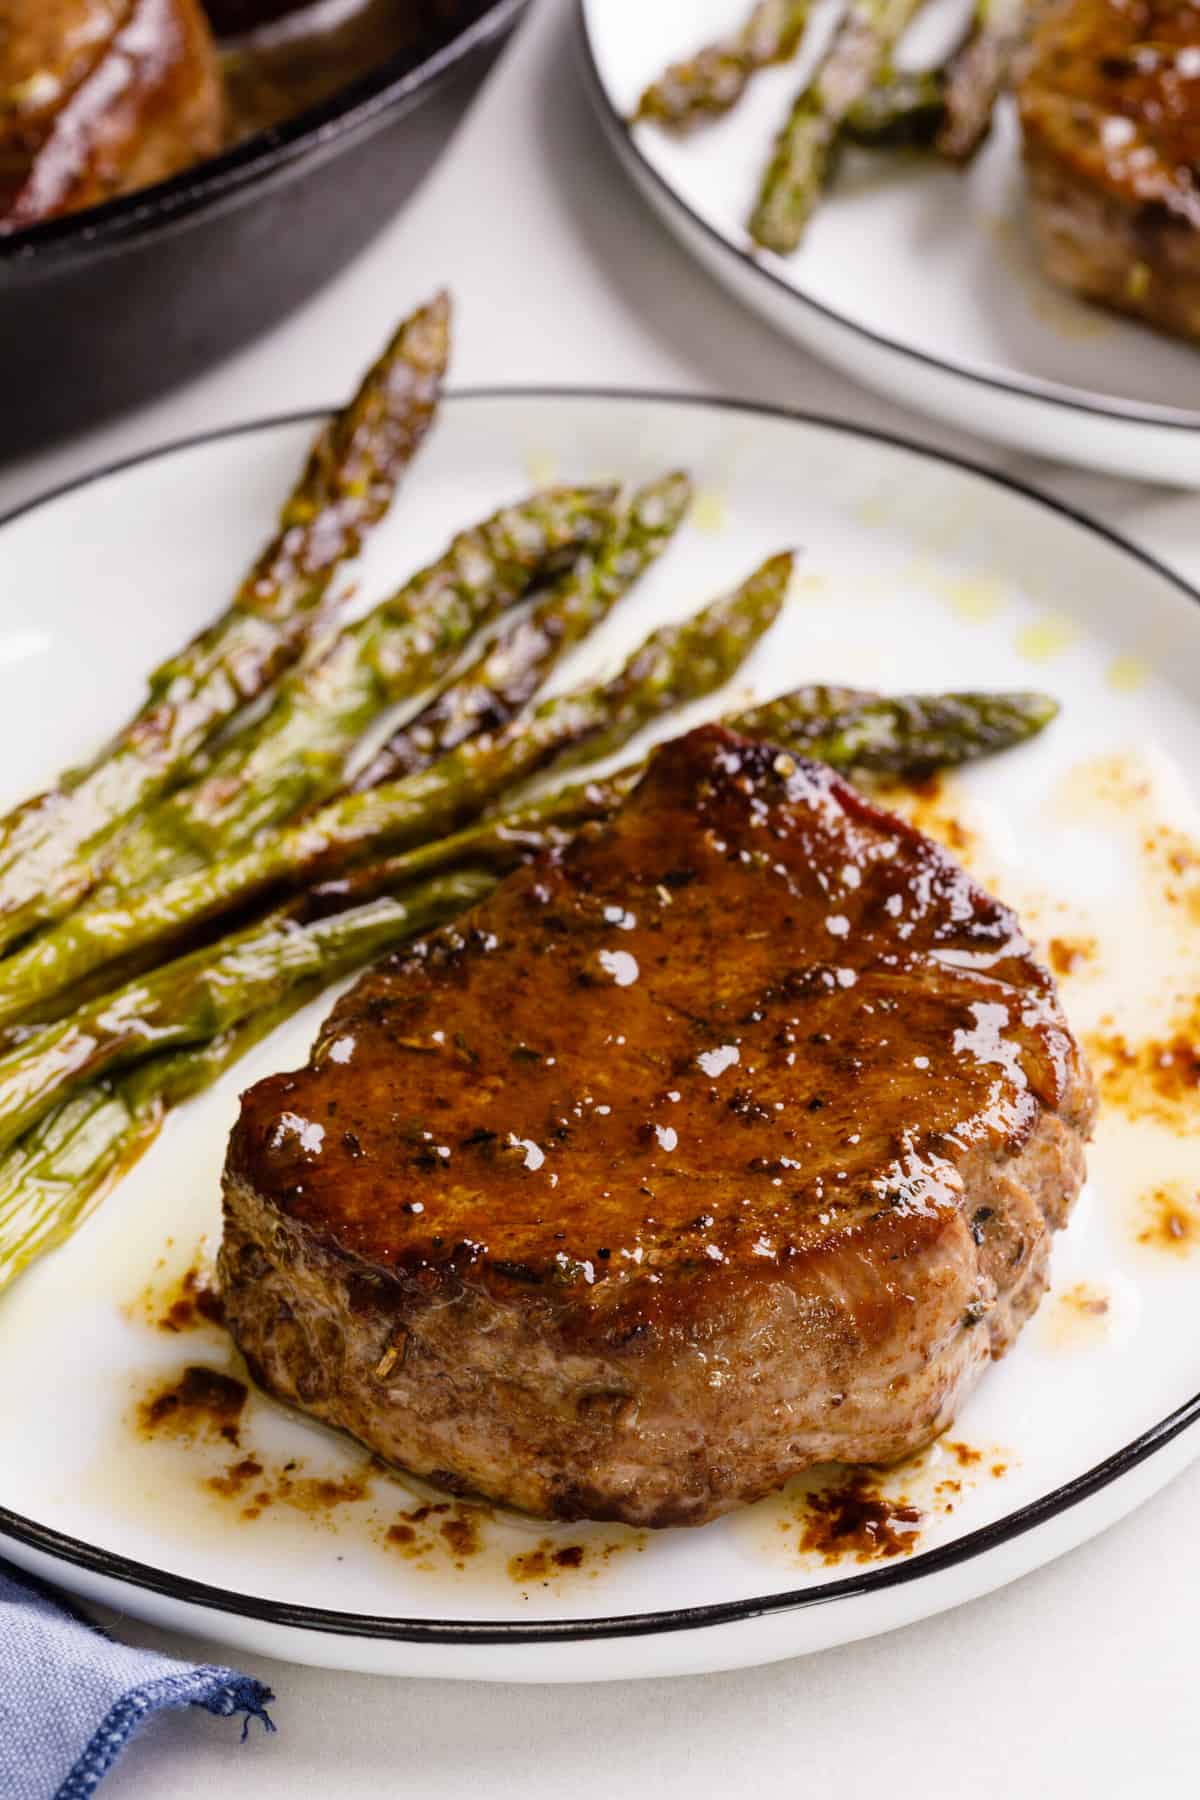 plate of filet mignon cooked in a cast iron skillet served on a white round plate with a side of roasted asparagus